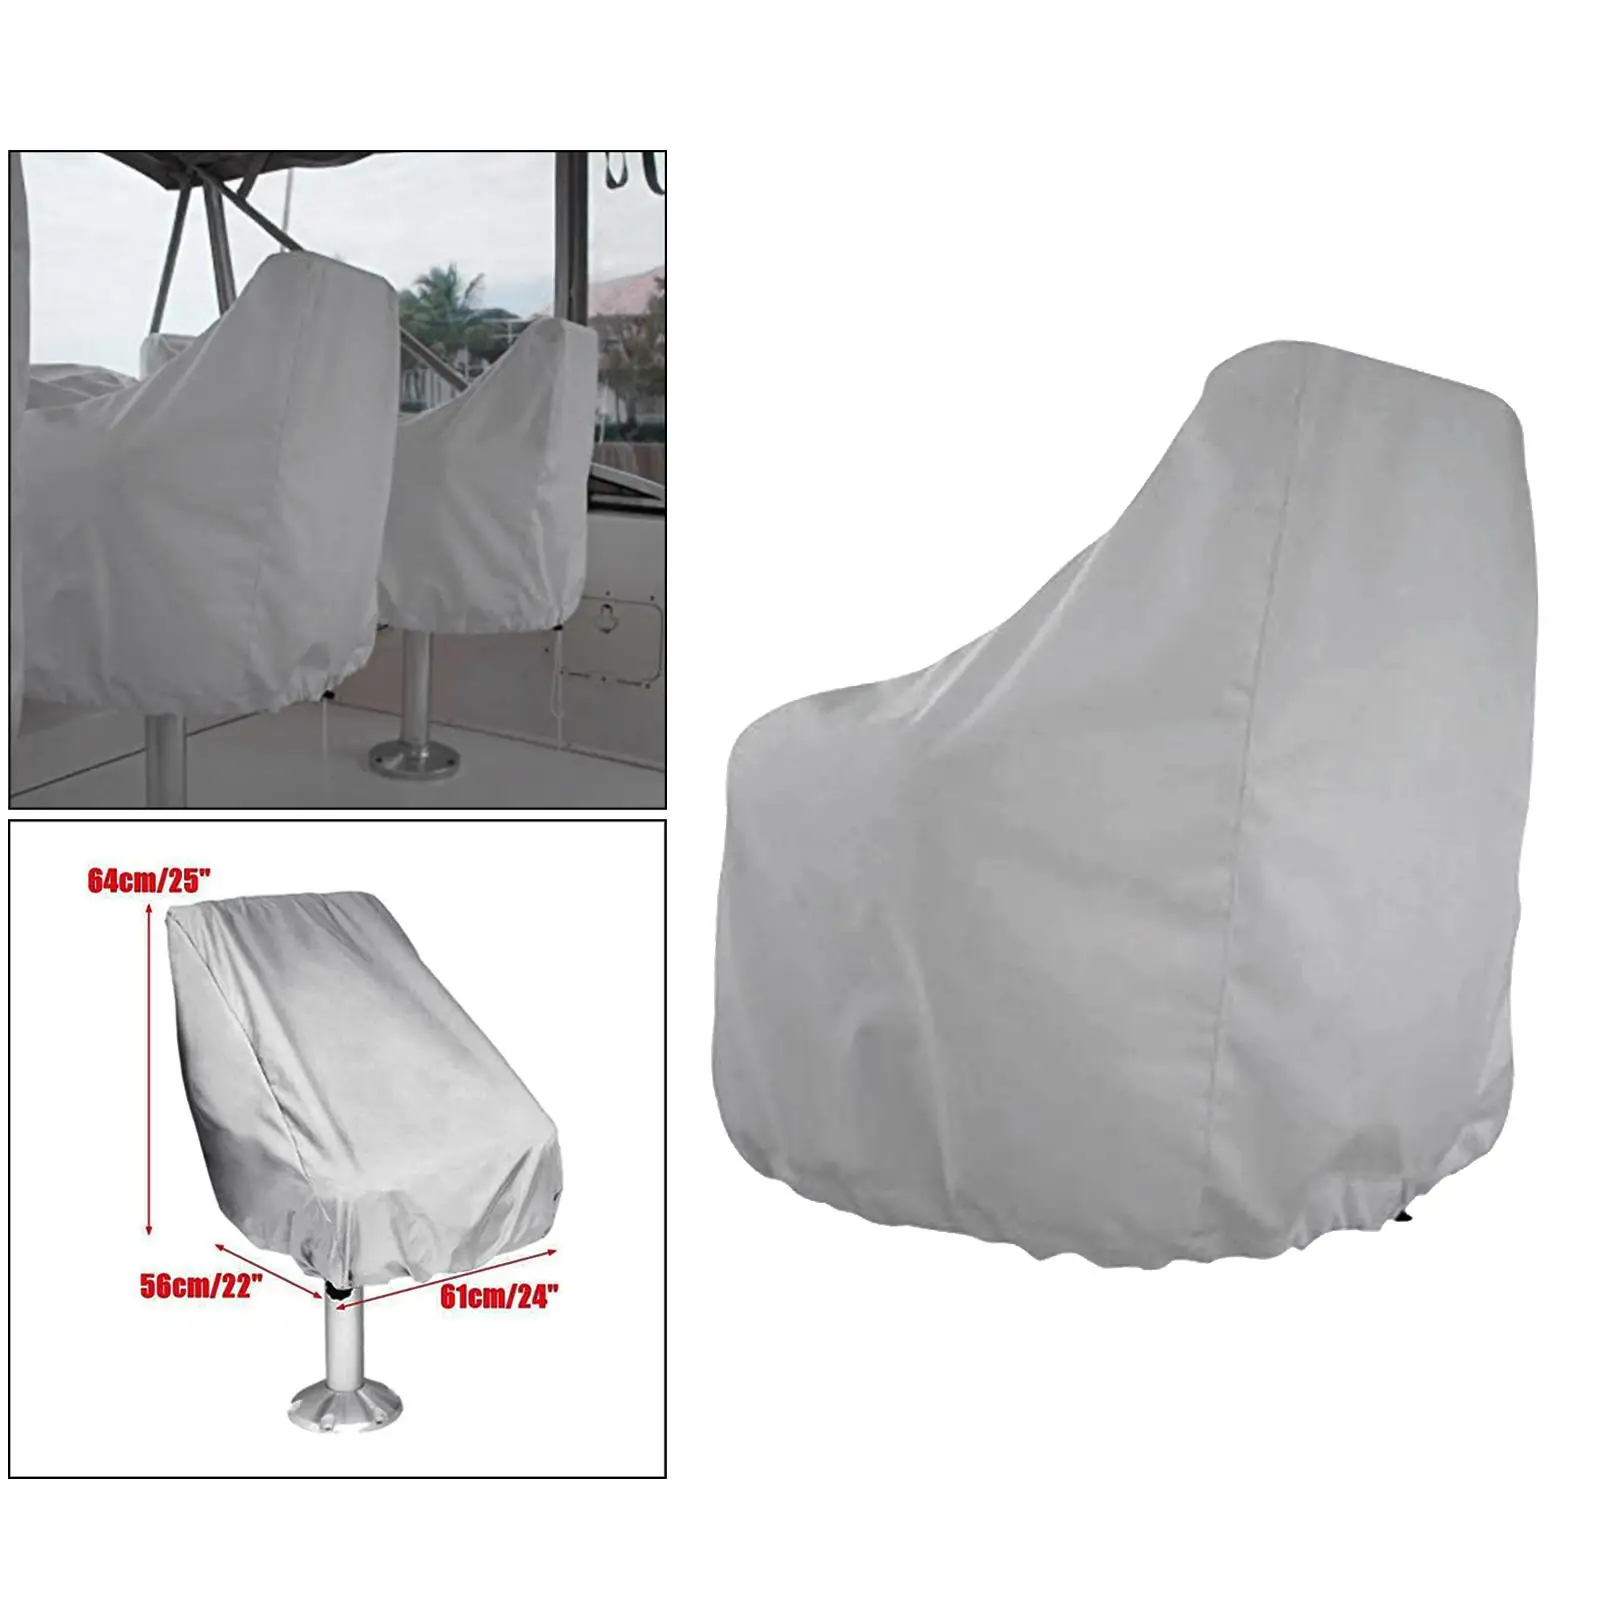 2 Seat Cover Outdoor Foldable Ship Fishing Waterproof Dust     Yacht Furniture  22x24x25.2inch